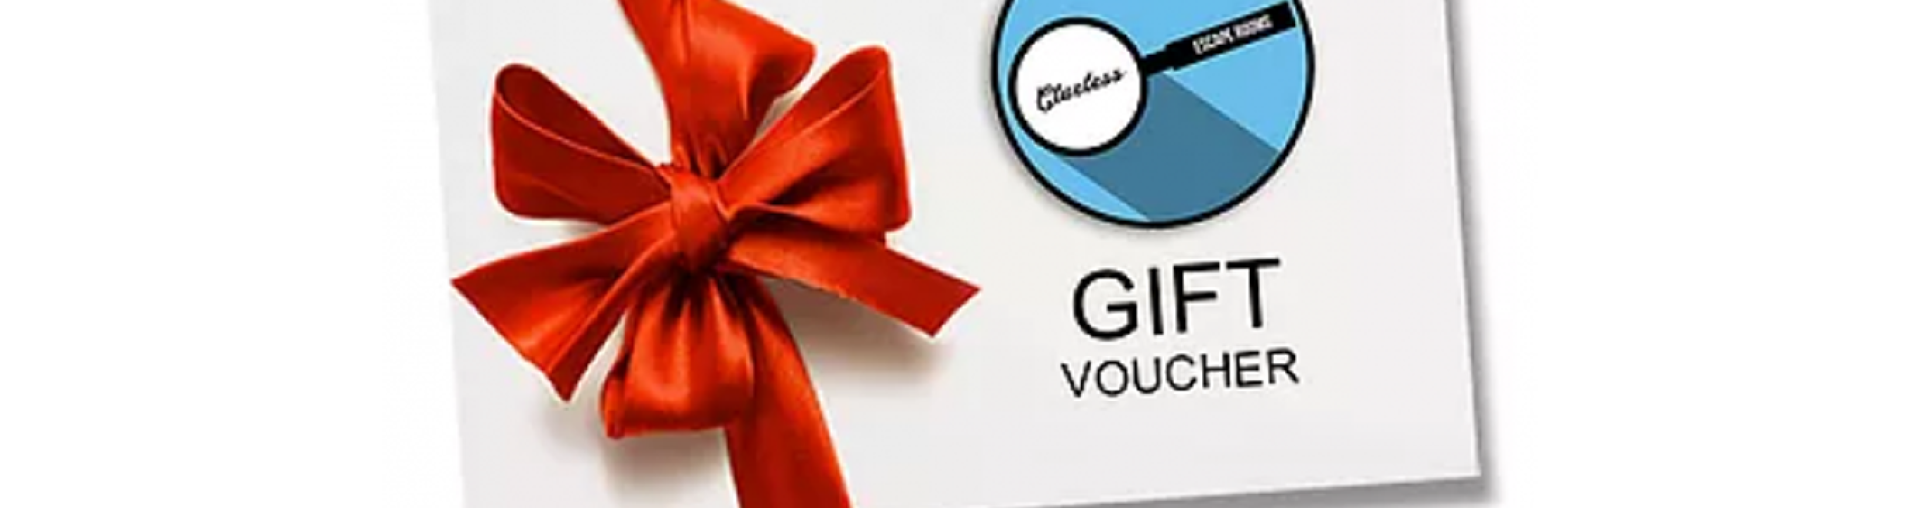 Gift certificate are perfect for special occasions, friends, and family. Make memories that last.